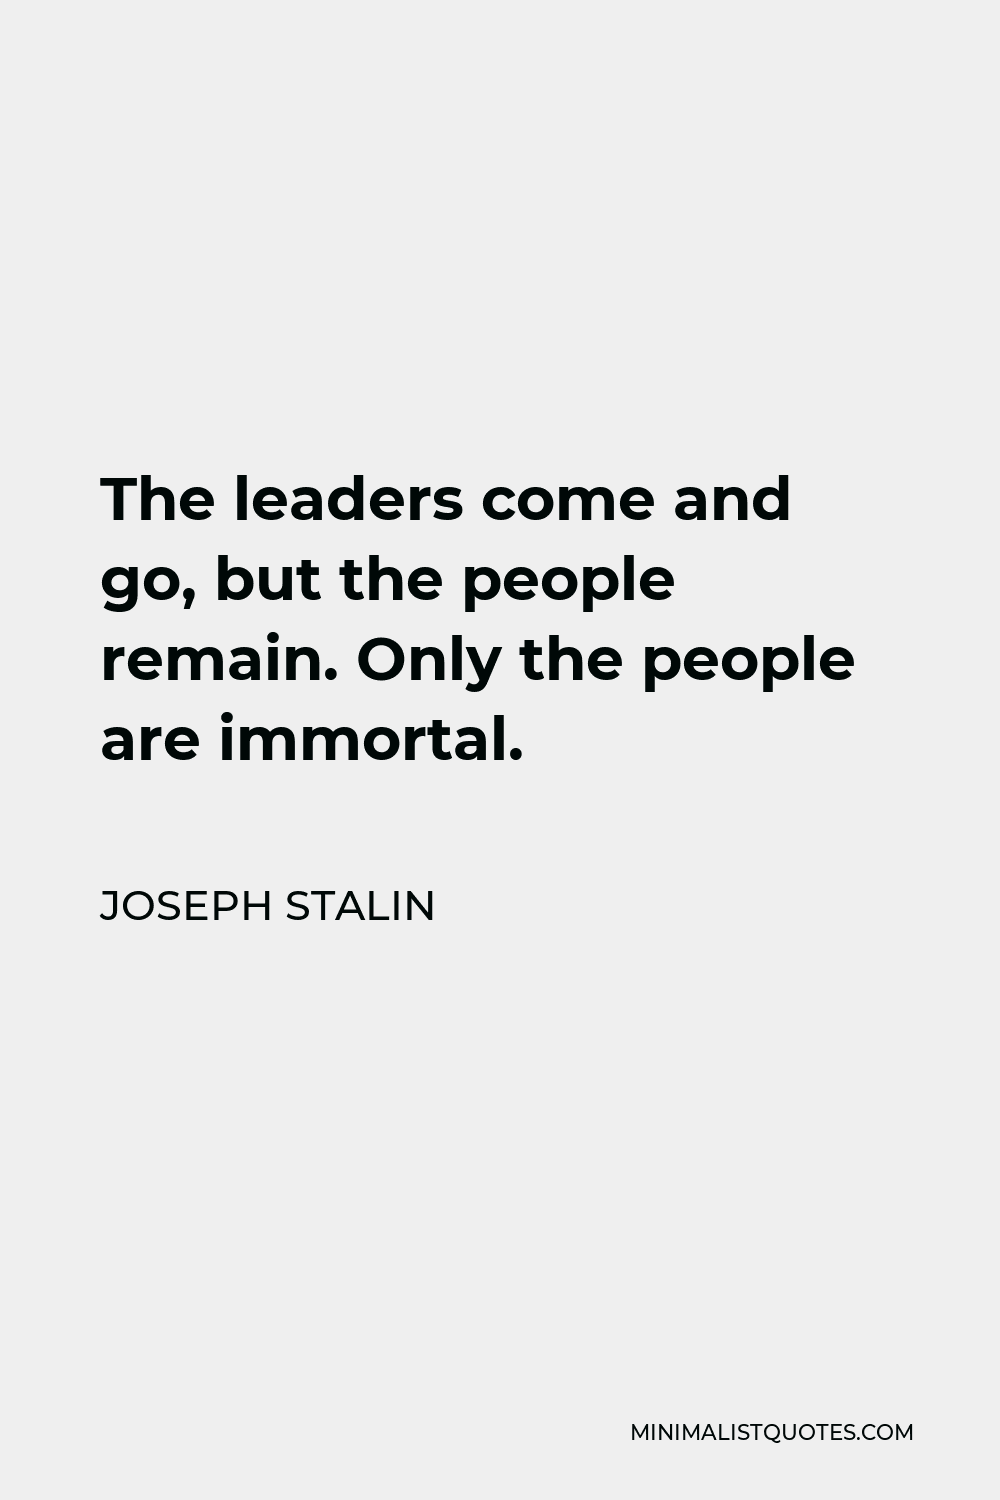 Joseph Stalin Quote - The leaders come and go, but the people remain. Only the people are immortal.